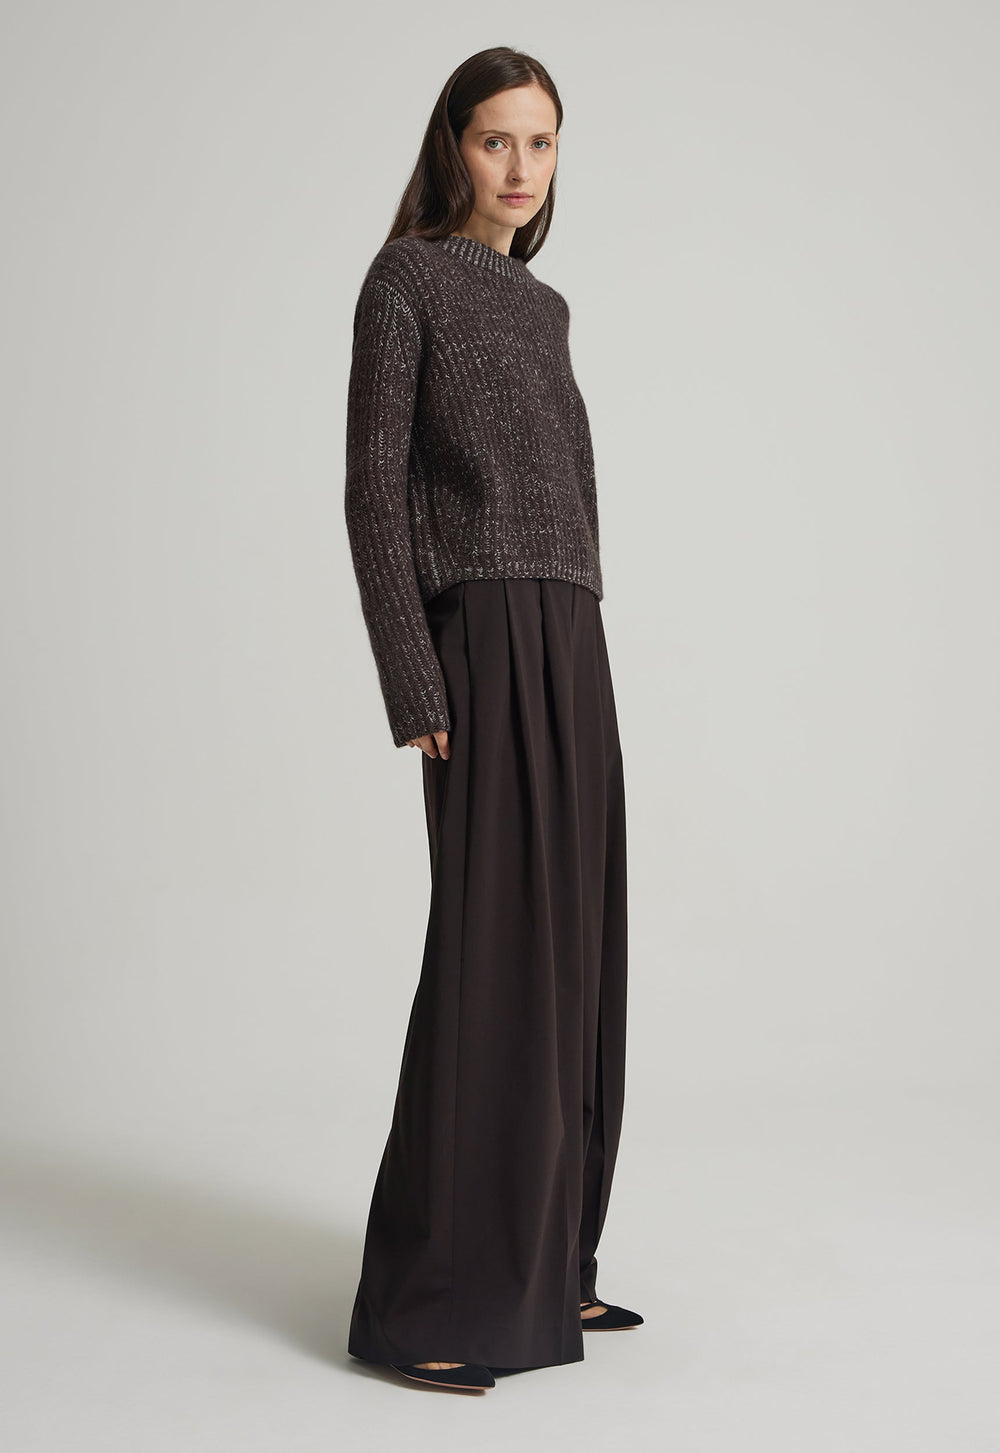 Jac+Jack HAYES CASHMERE SWEATER in Peppercorn Marle/whisper